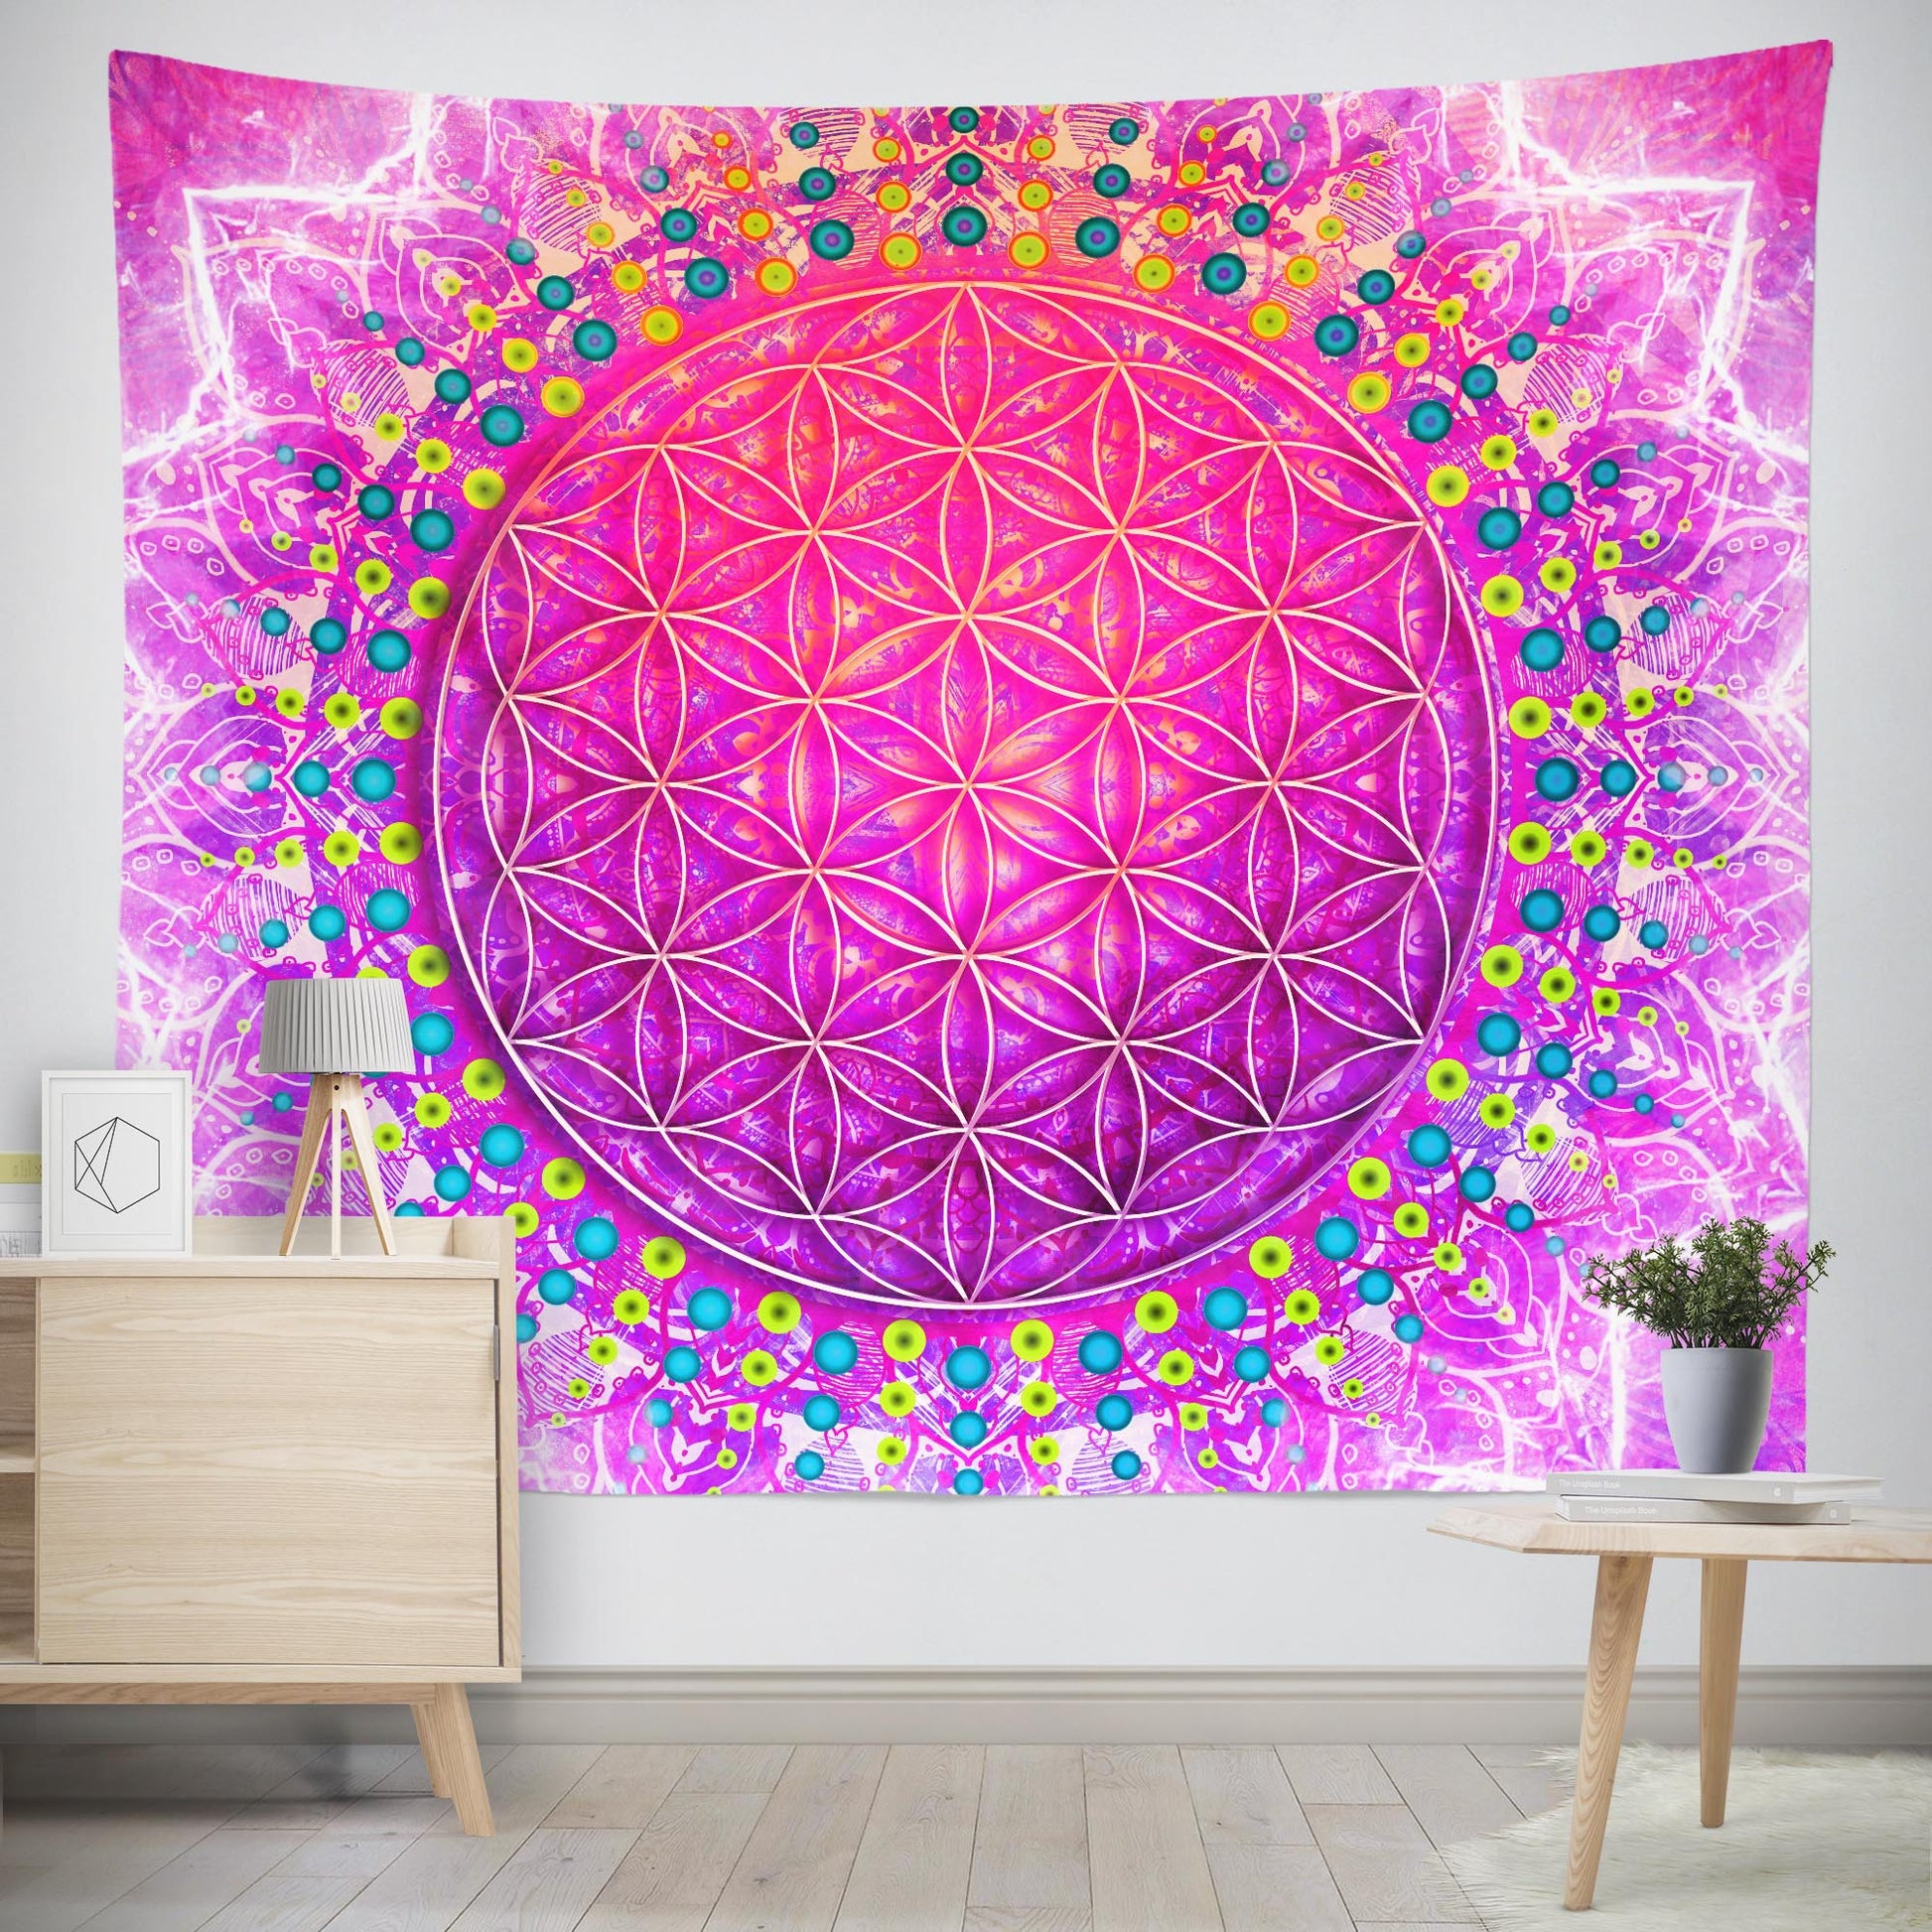 Extra large flower of life wall tapestry